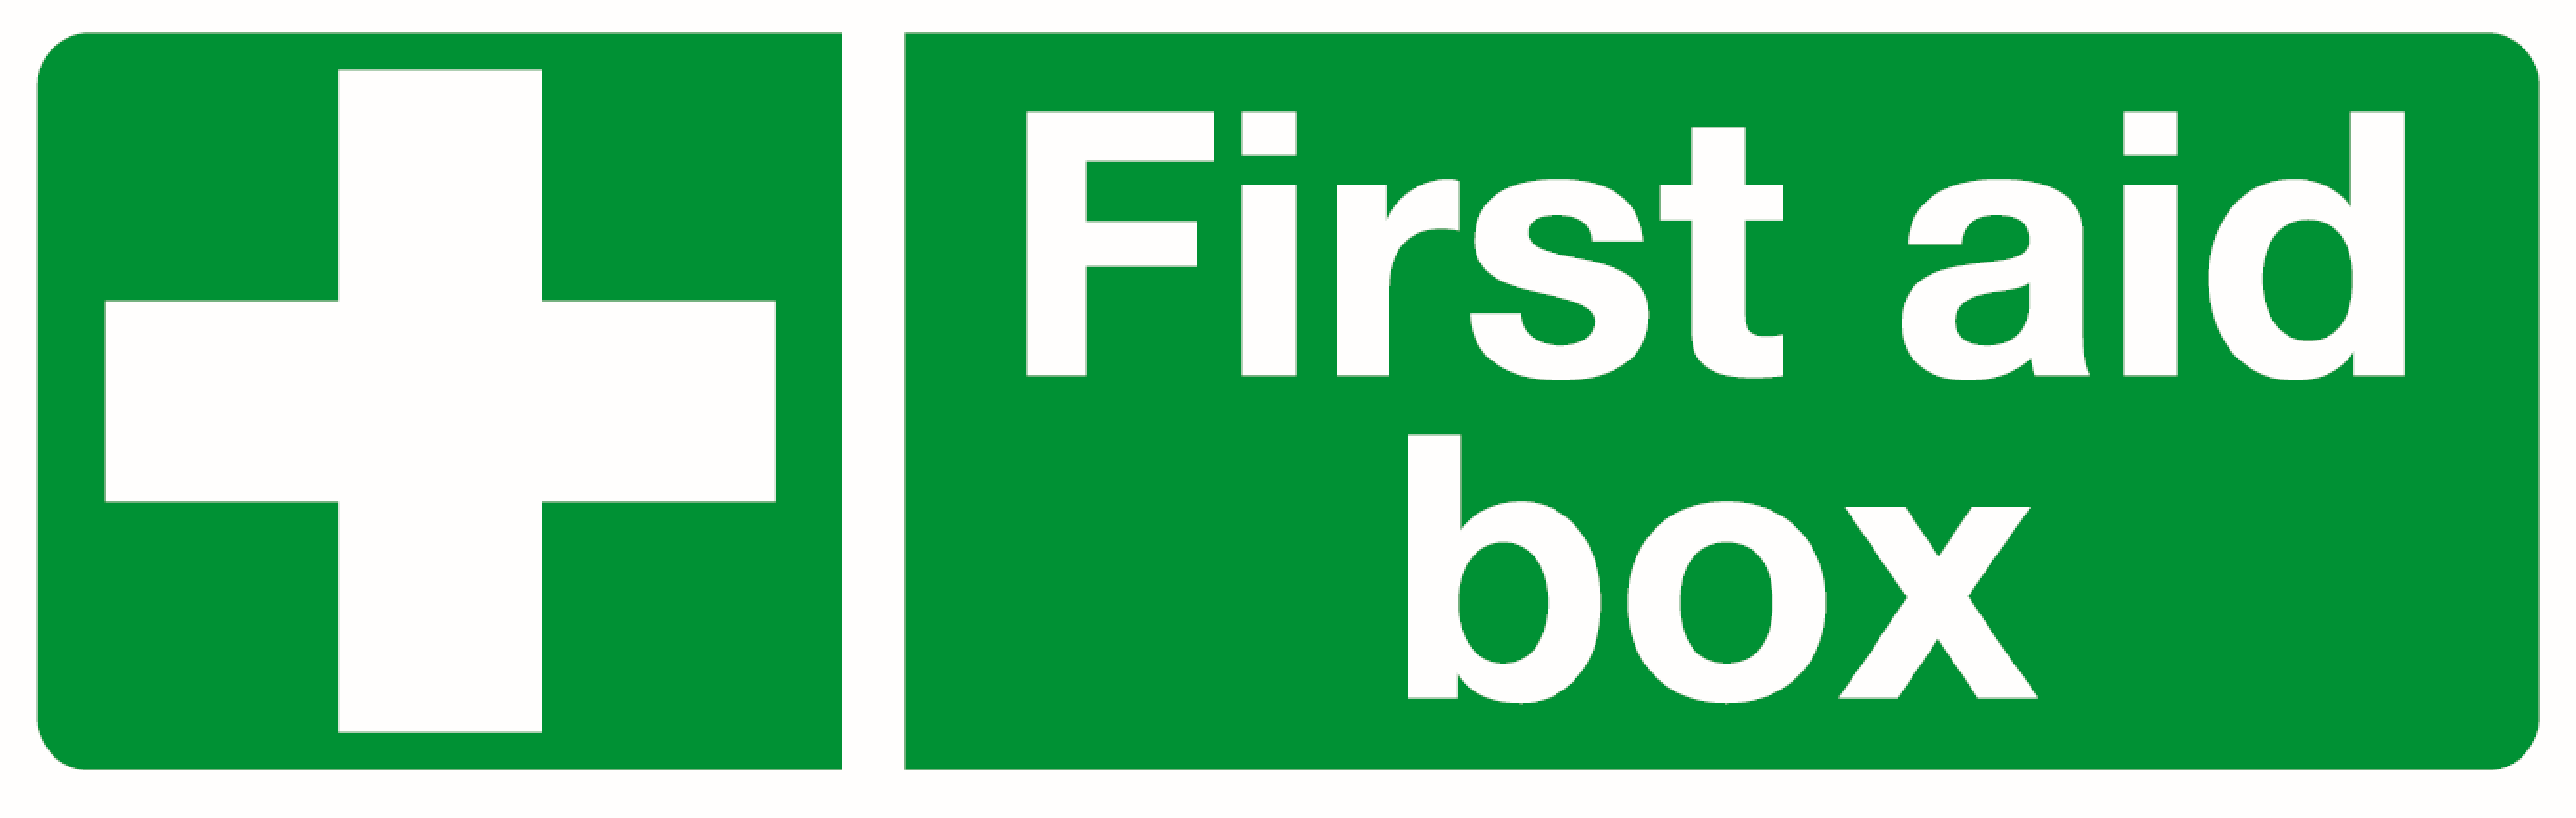 First Aid Kit Logo - Free First Aid Sign, Download Free Clip Art, Free Clip Art on ...